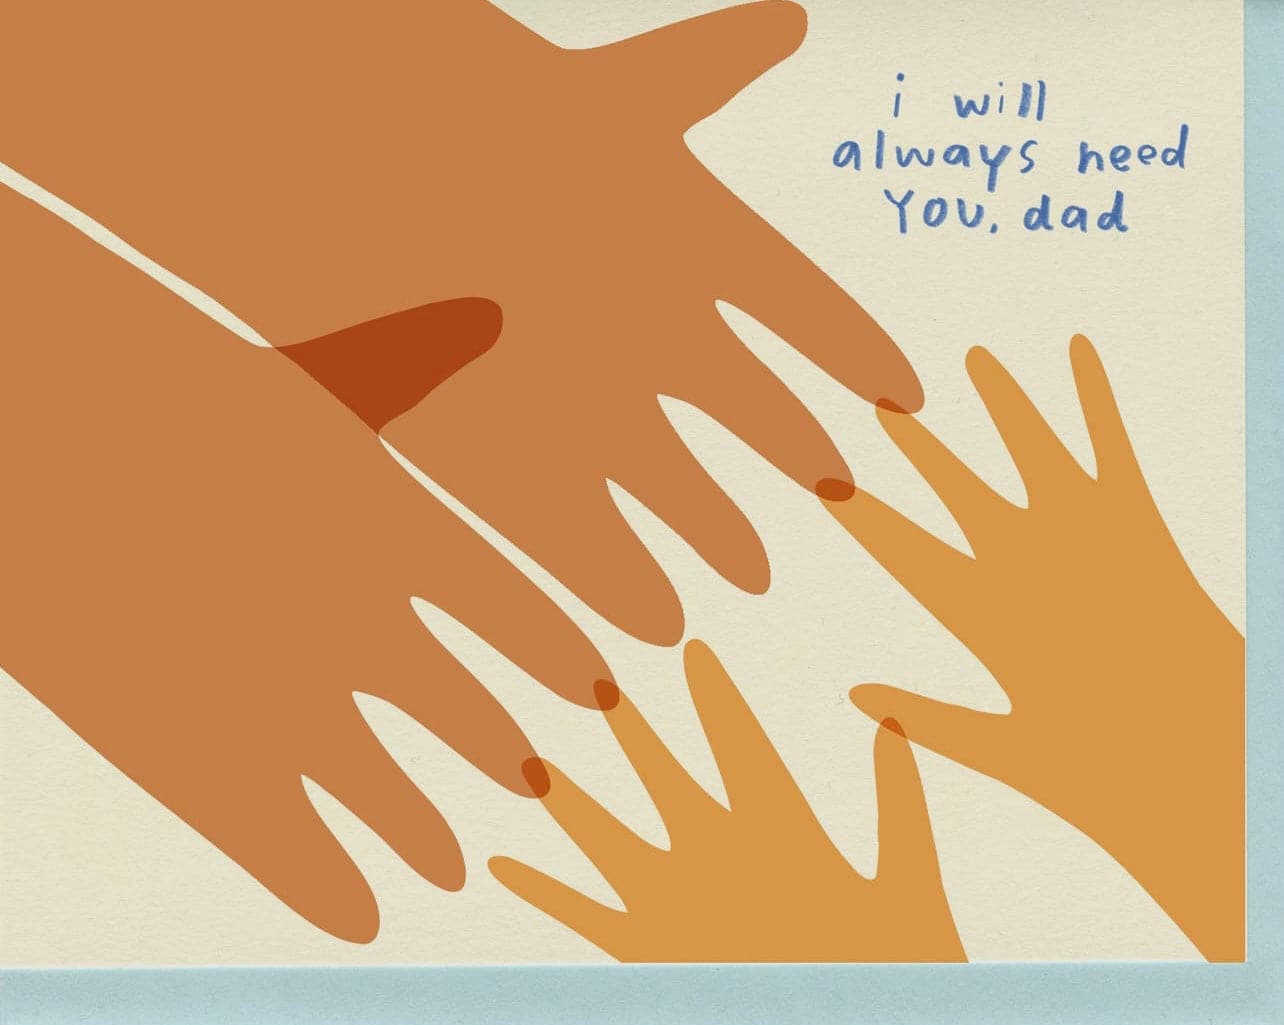 Father’s Day greeting card